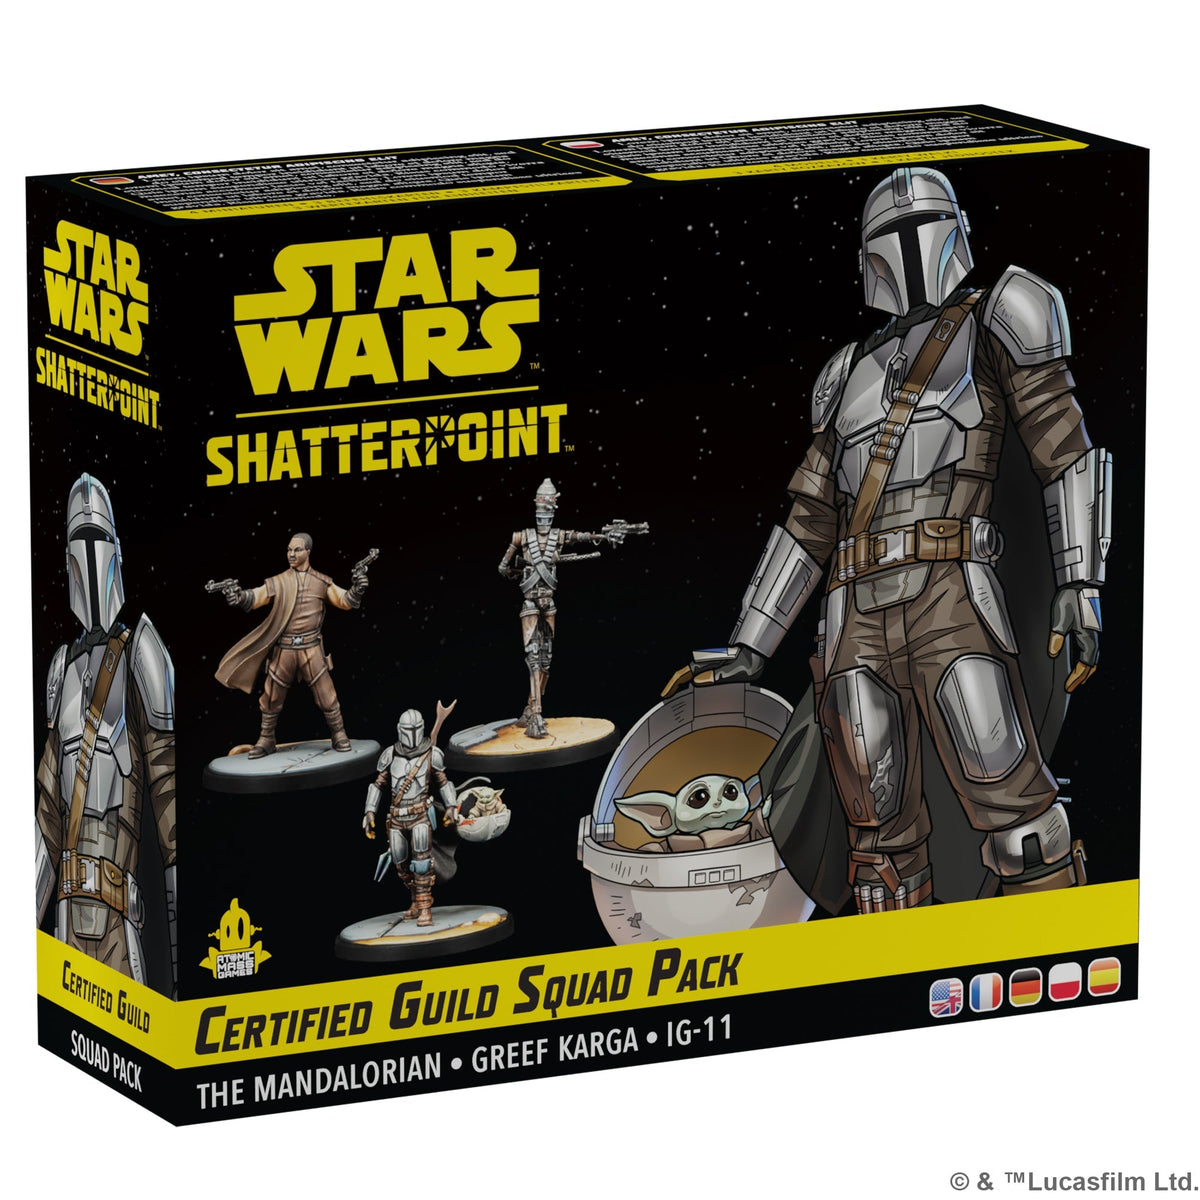 Certified Guild Squad Pack (Star Wars: Shatterpoint)